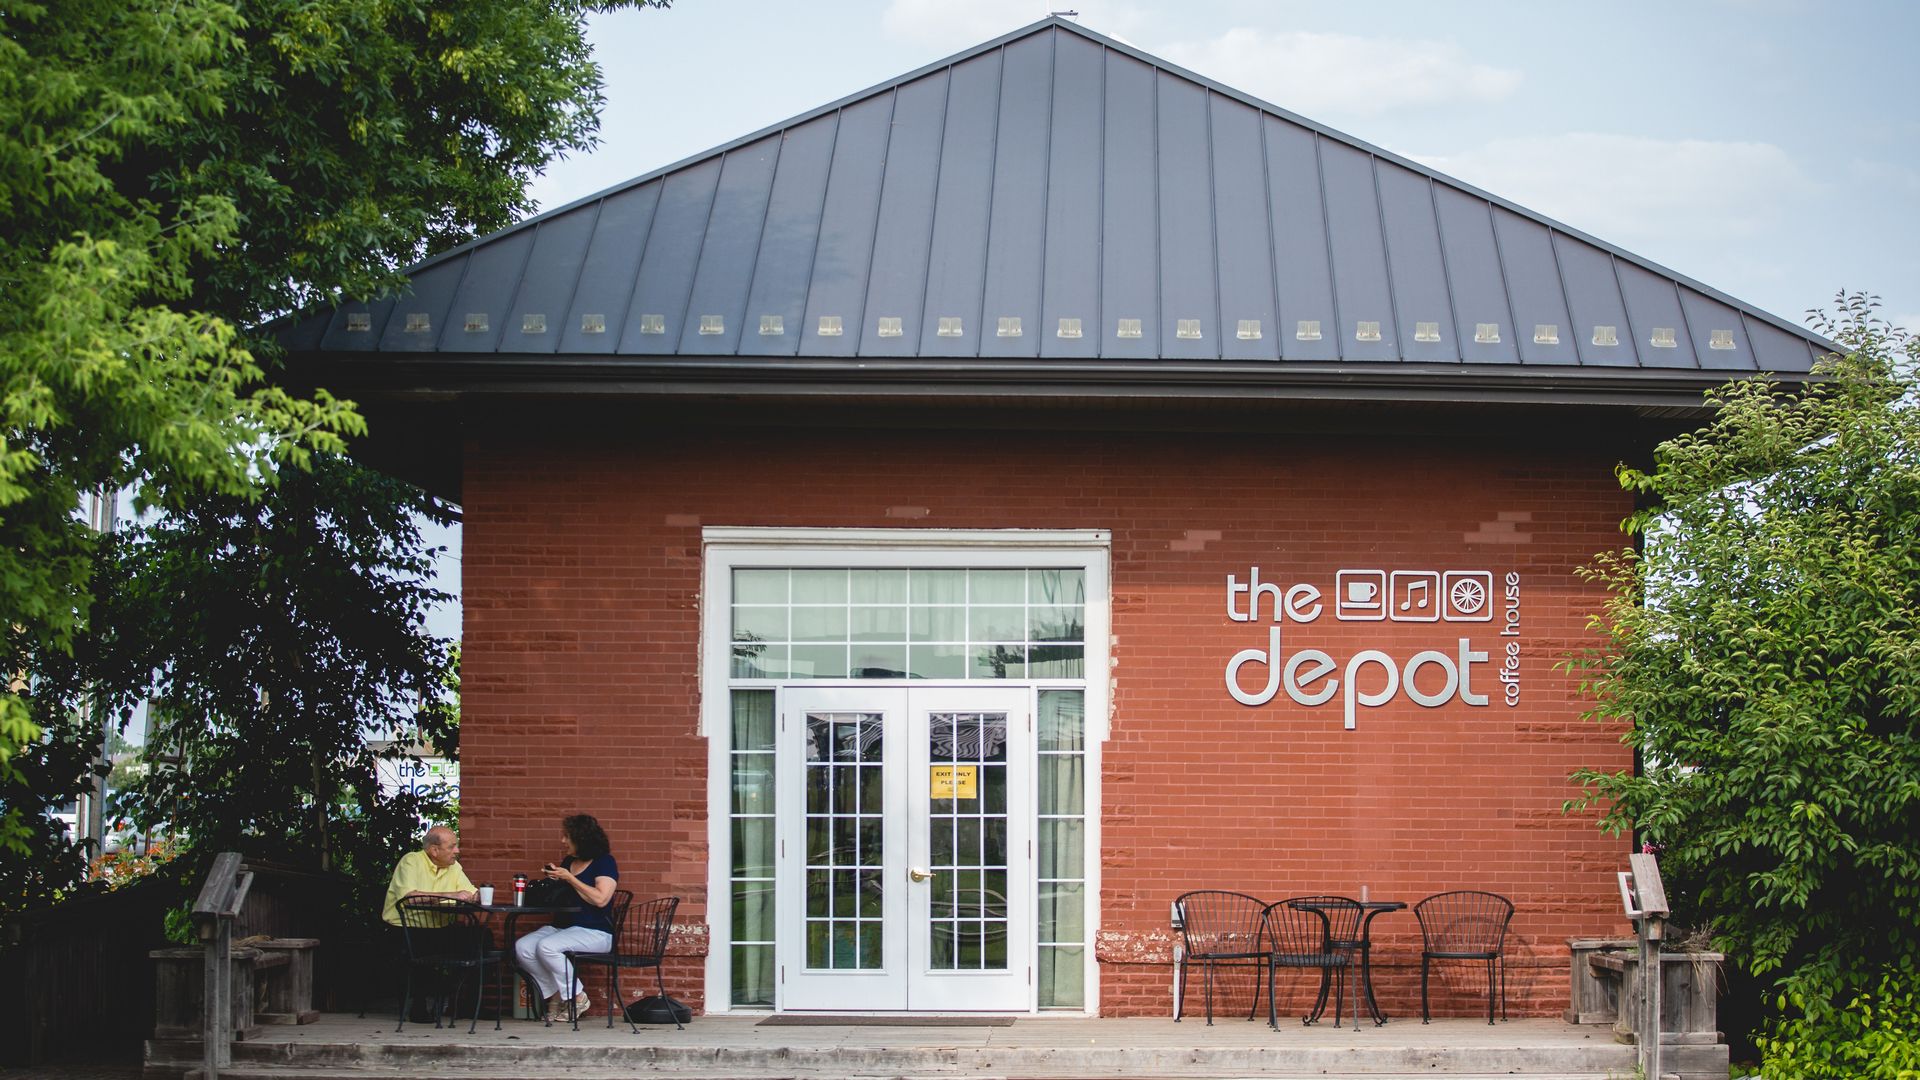 The exterior of the Depot Coffee House